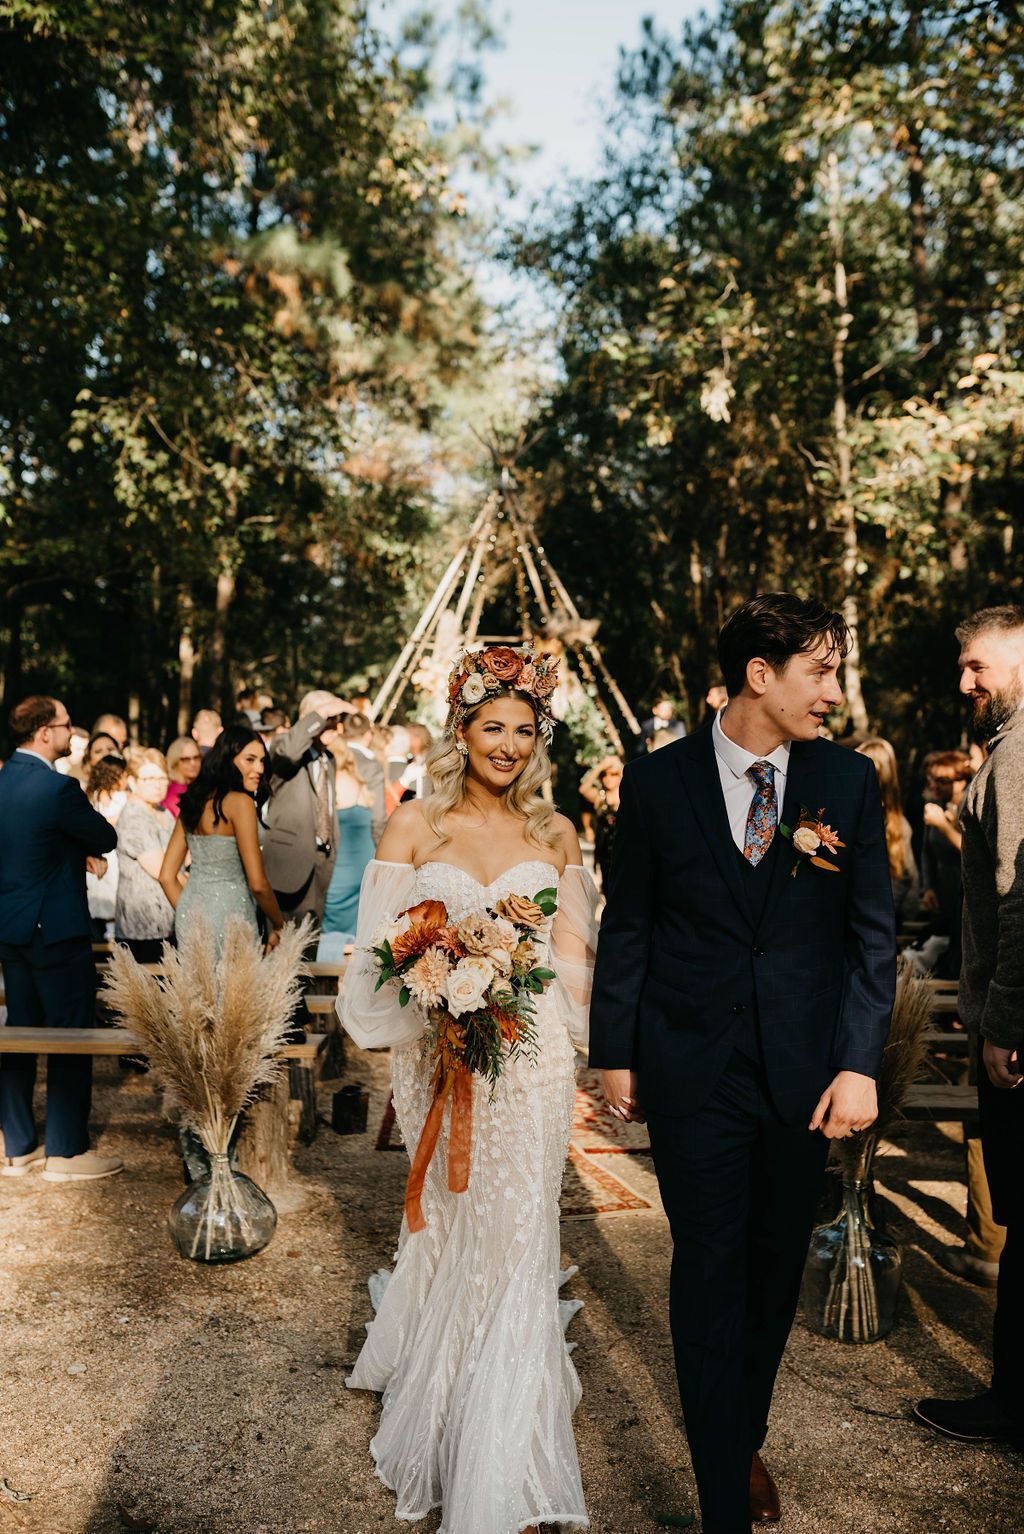 Experience the romantic allure of Nem & Kat's fairy tale wedding amidst towering pine trees and enchanting Tipis at The Shire in Huntsville, Texas. Dive into a truly magical photographic journey with Dear Juliets Photography